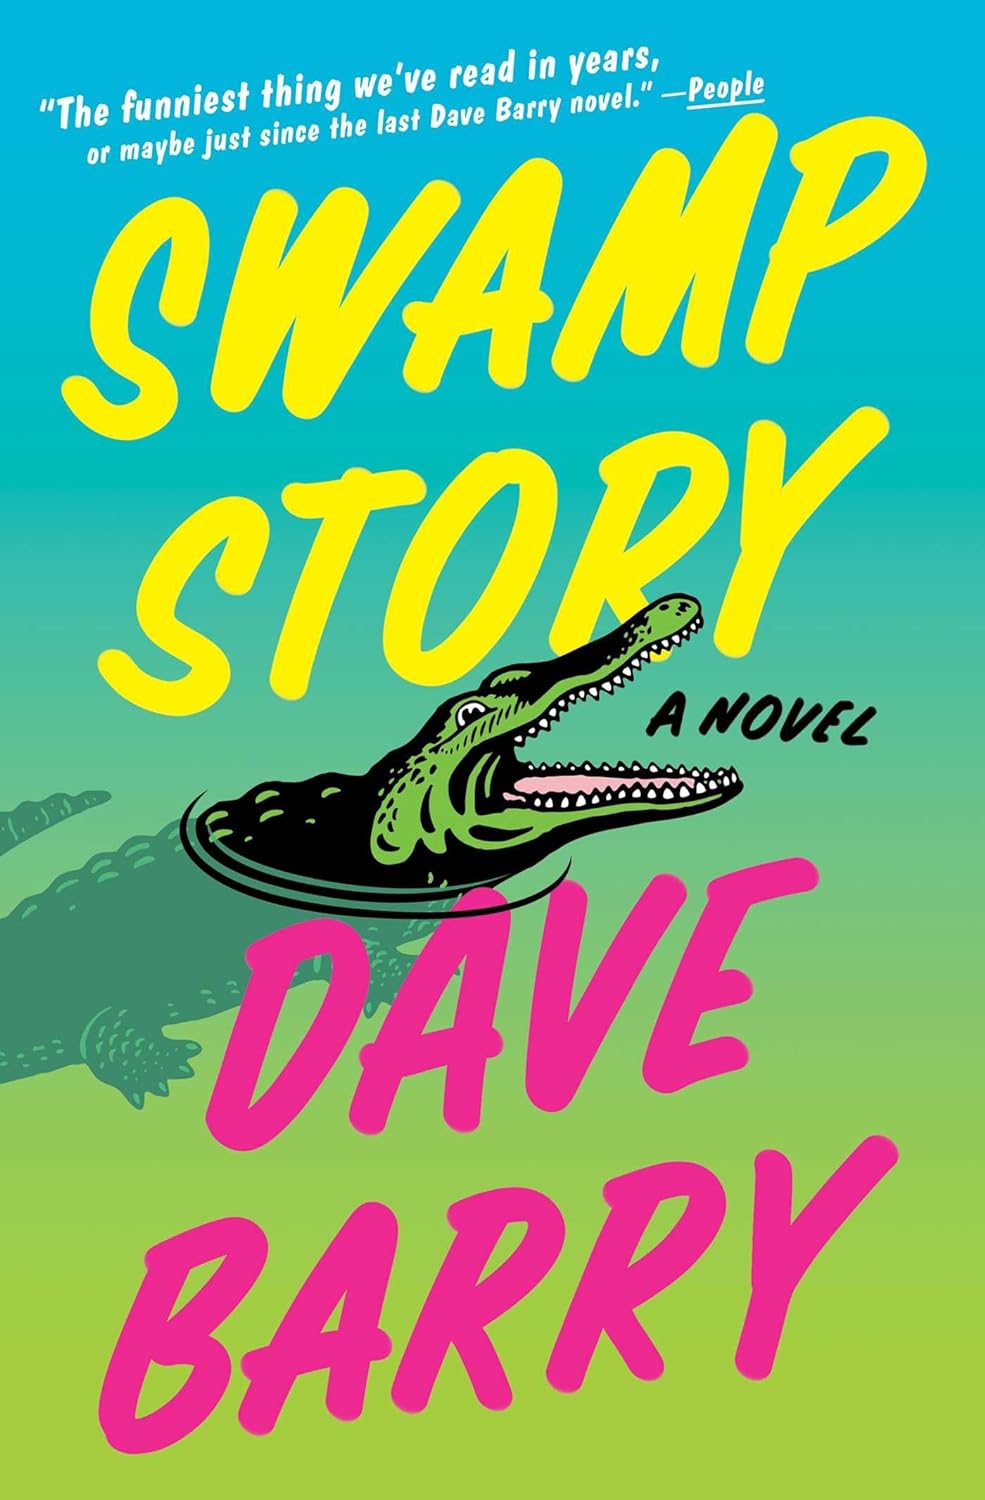 Image for "Swamp Story"